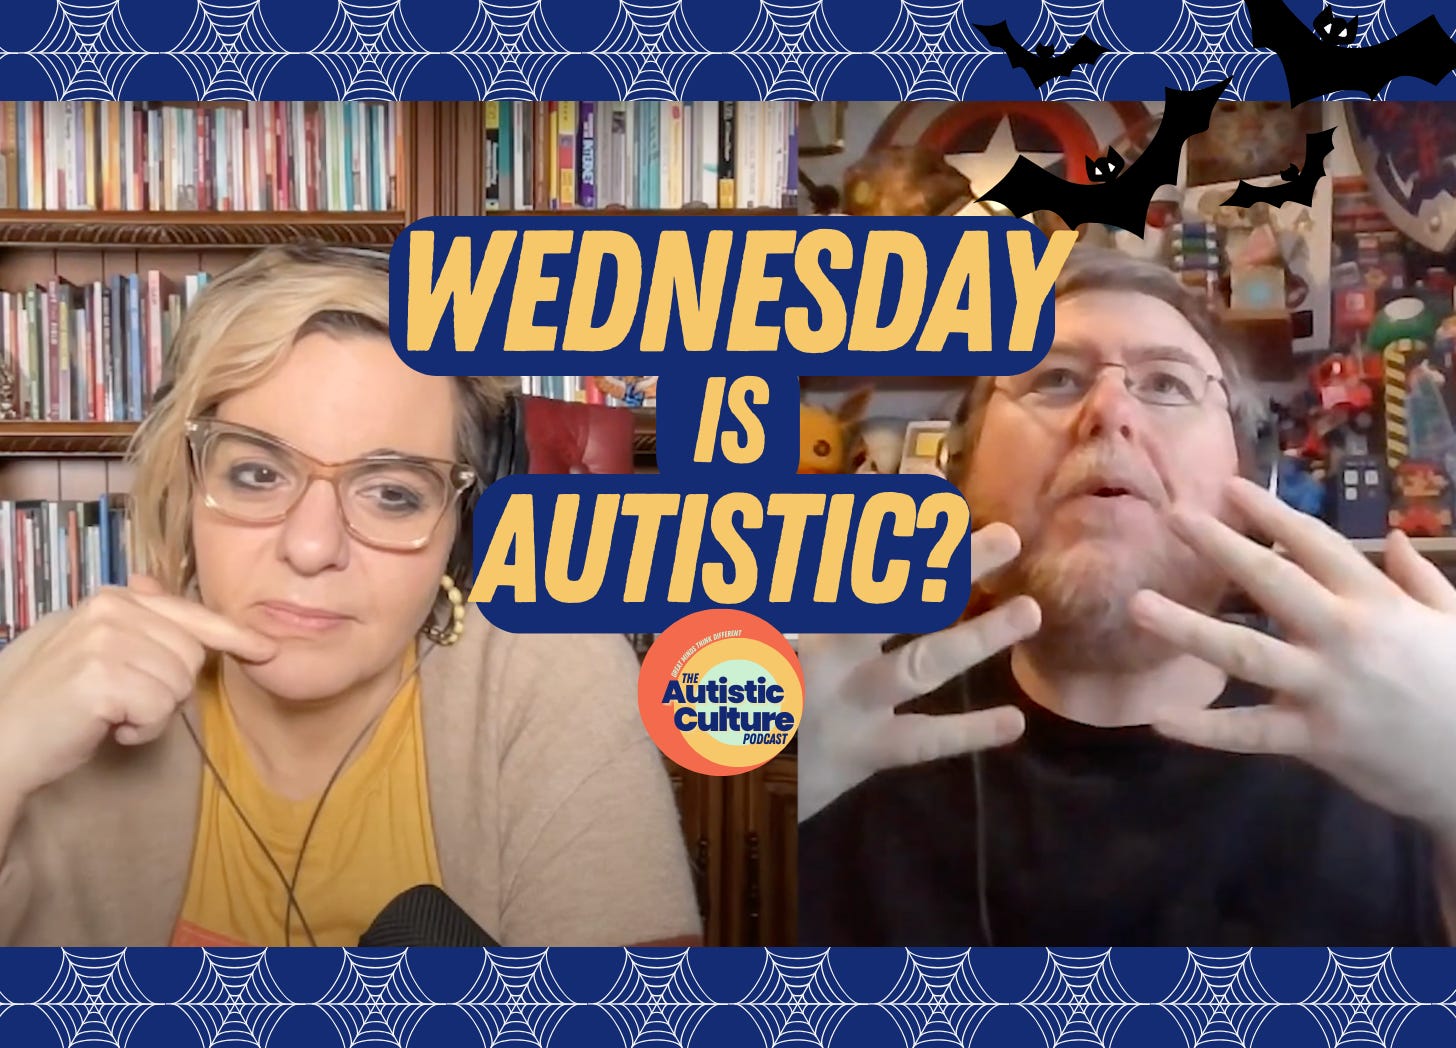 Listen to Autistic podcast hosts discuss: Is Wednesday Autistic? Autism podcast | Matt and Angela talks about whether or not Wednesday is an Autistic character.  